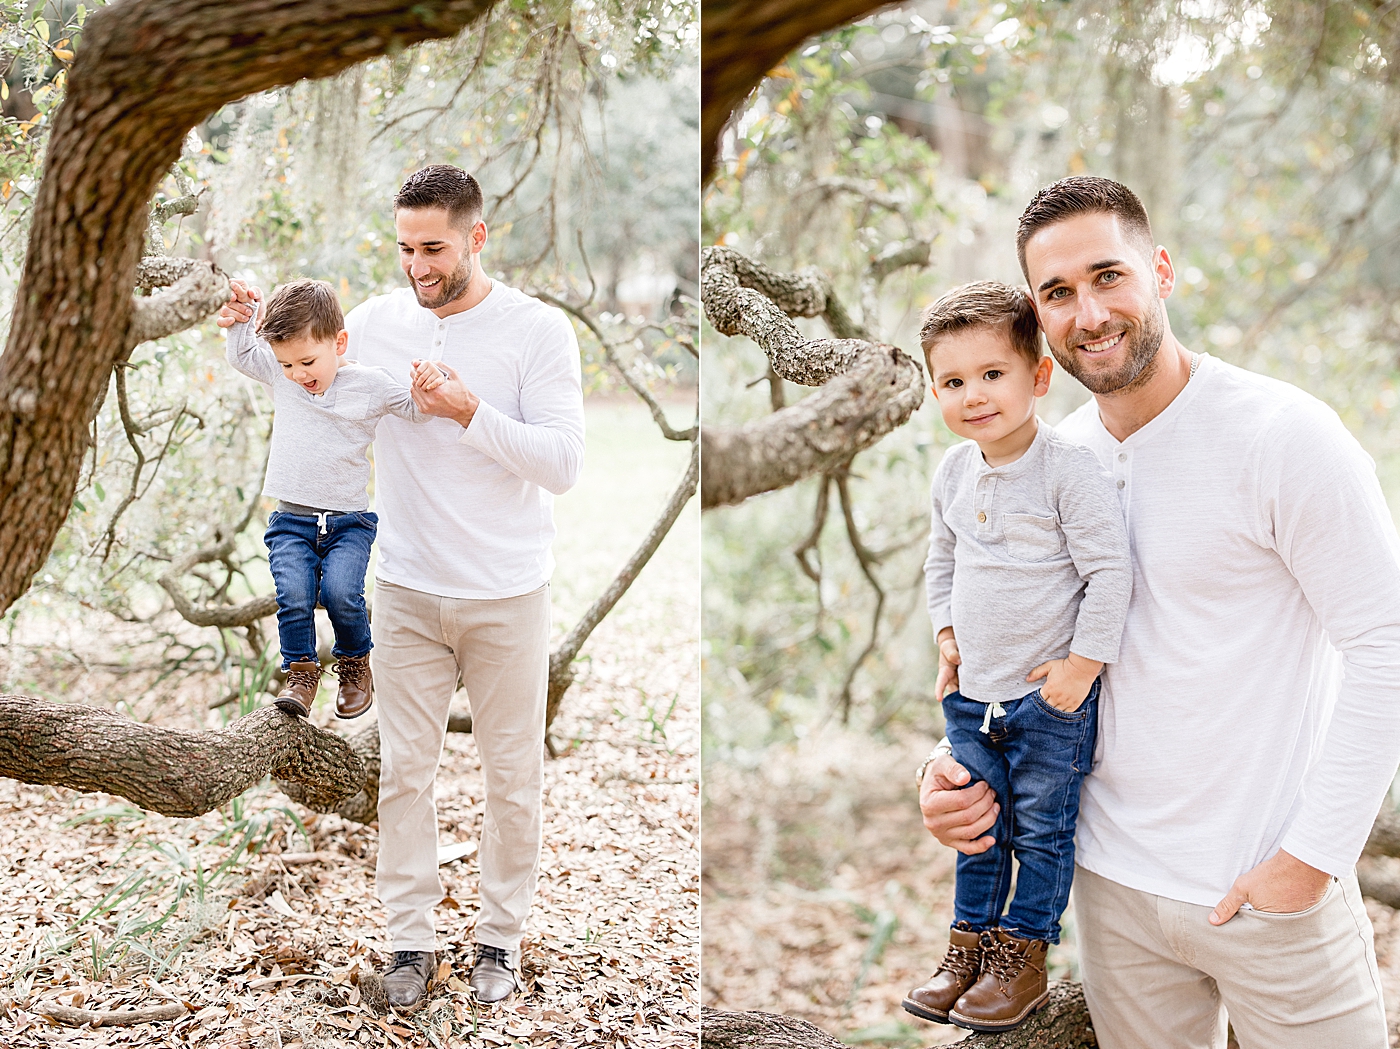 Kevin Kiermaier Family Members and Children